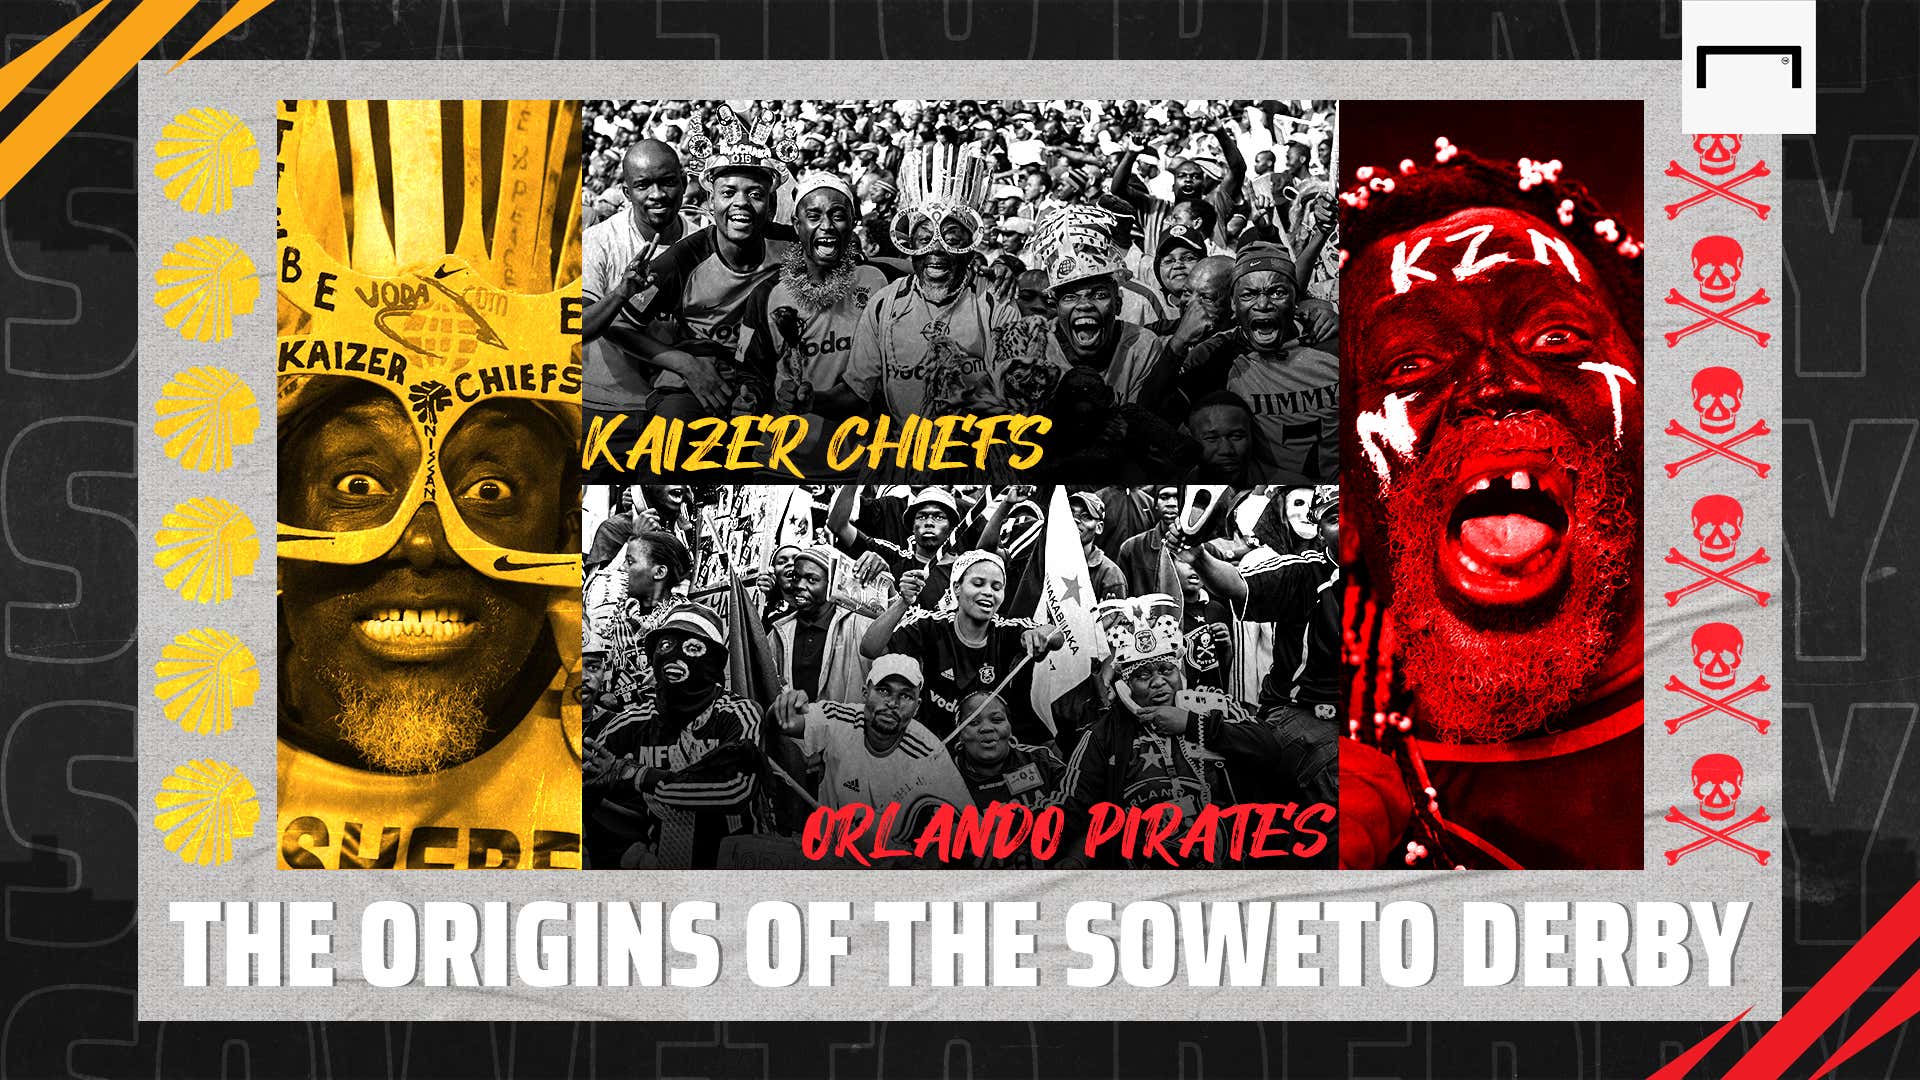 The origins of the Soweto Derby